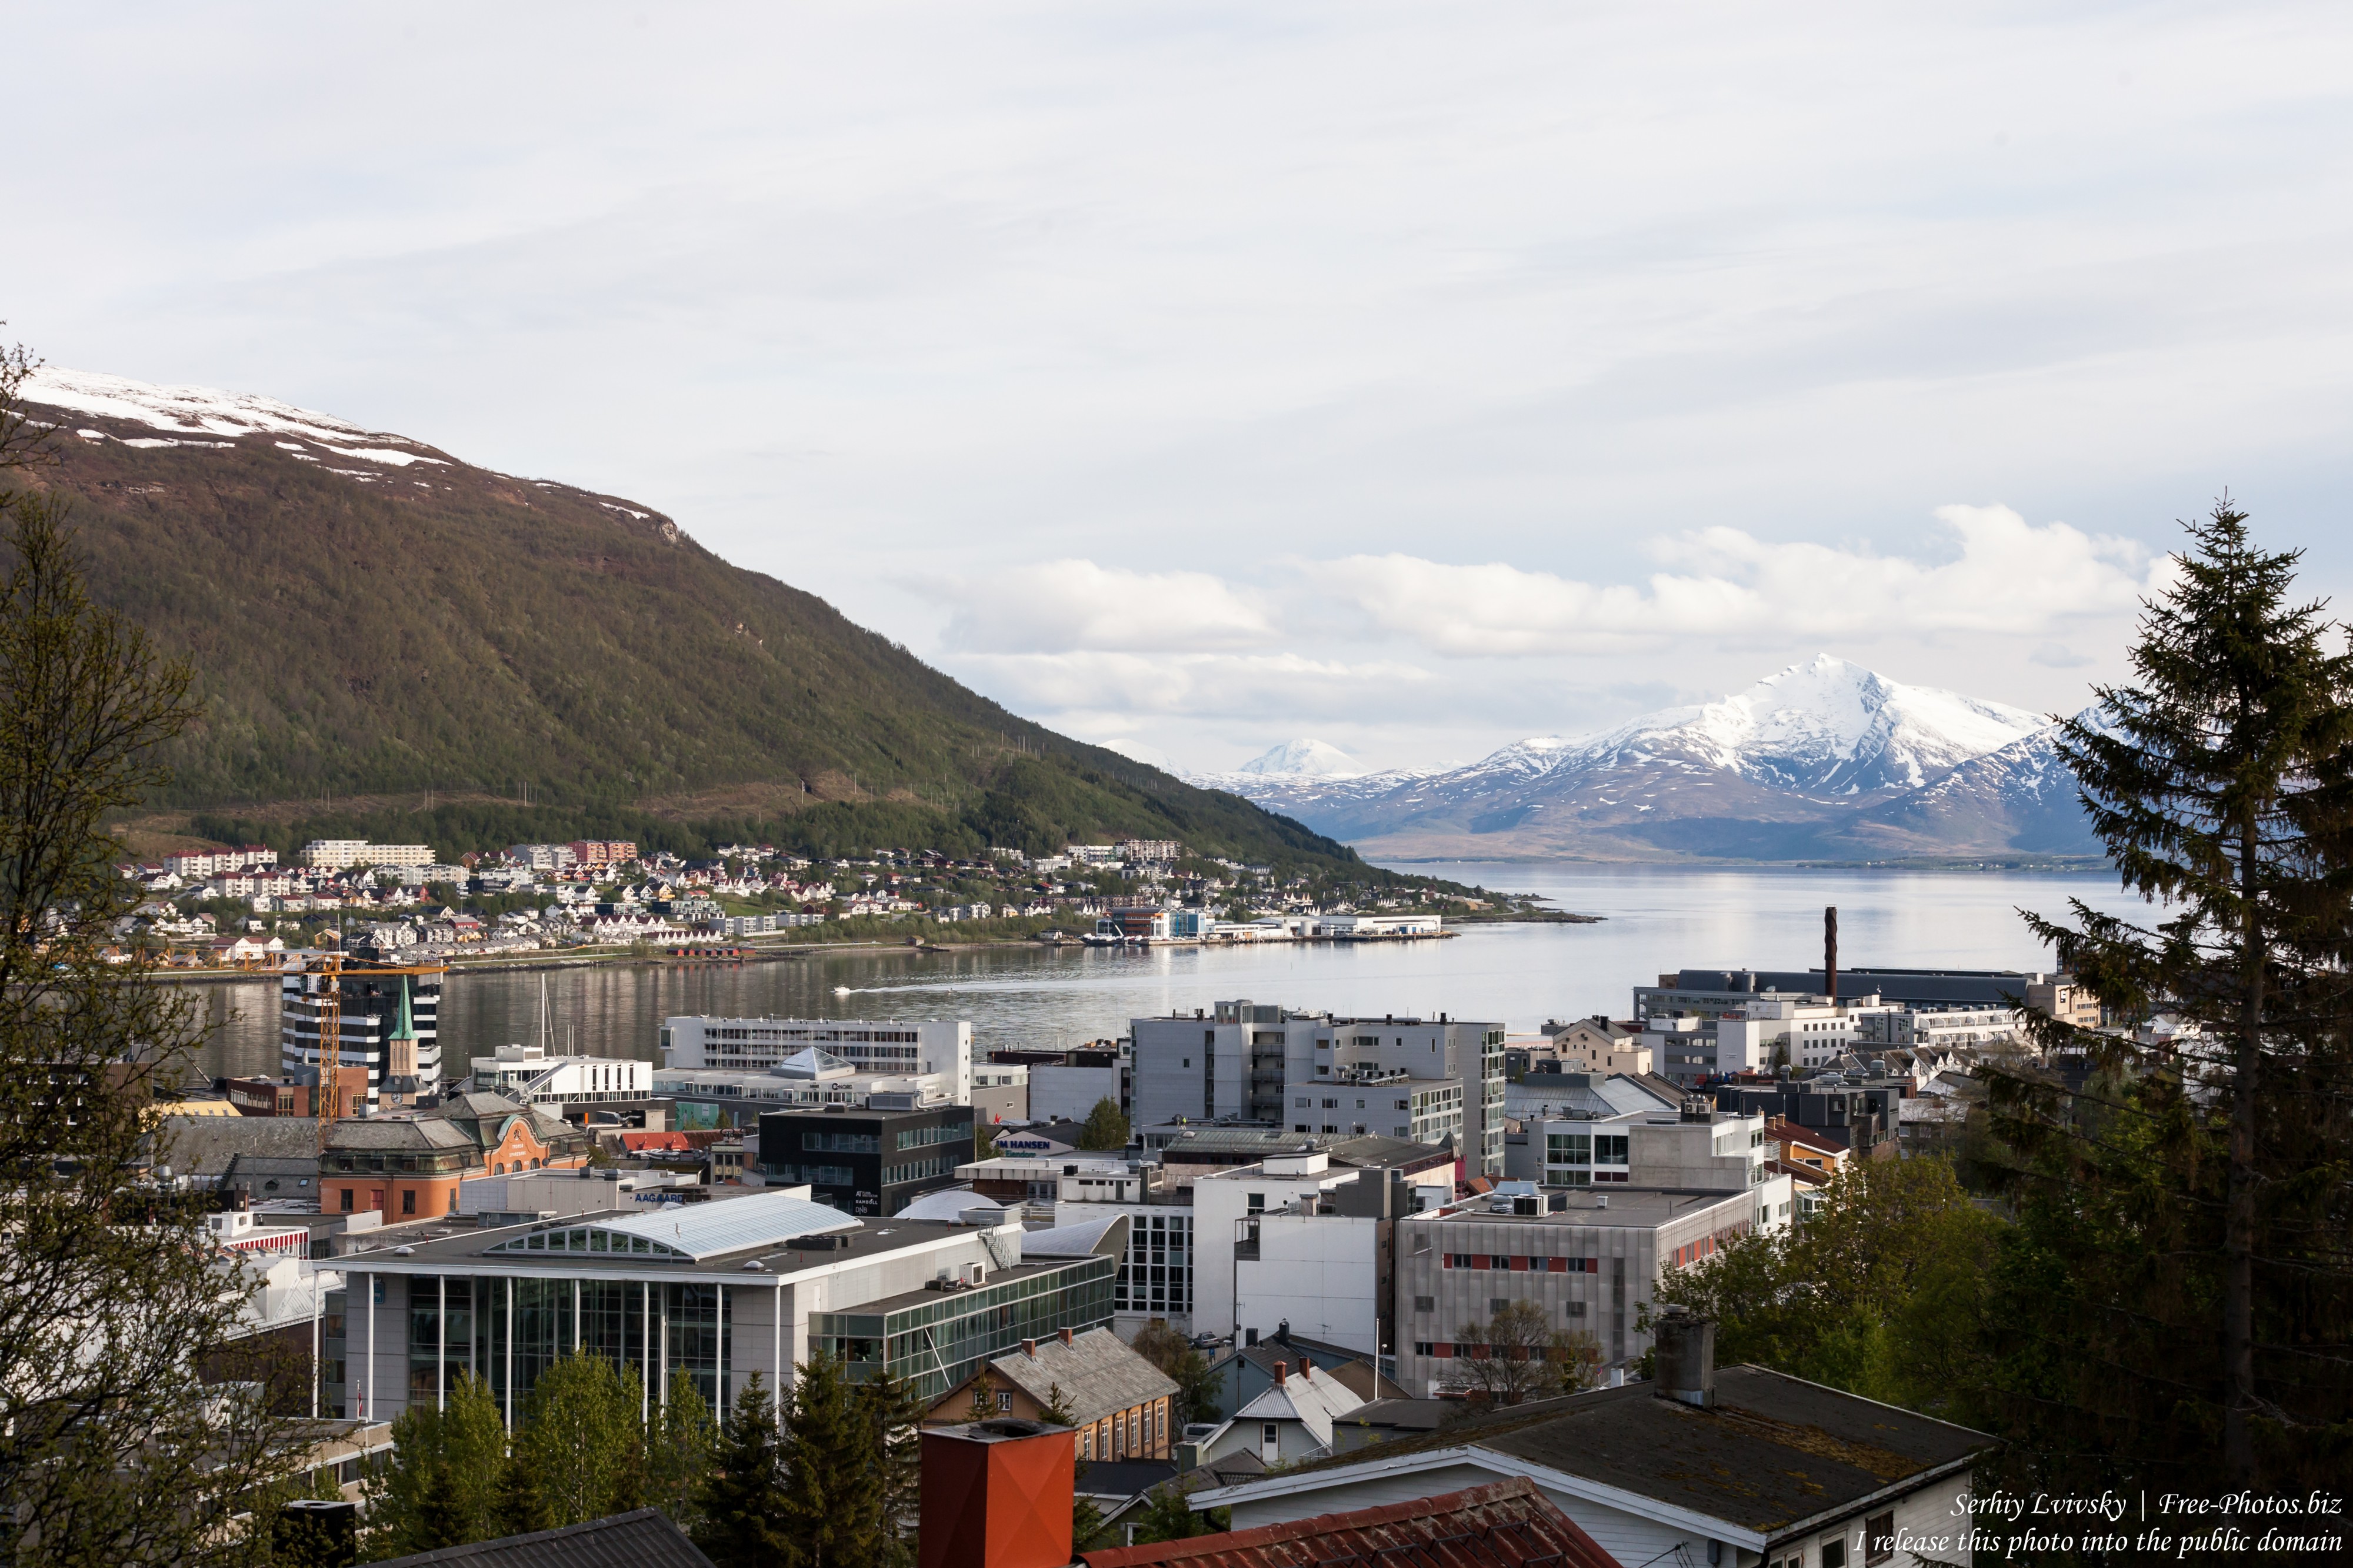 Tromso, Norway, photographed in June 2018 by Serhiy Lvivsky, picture 65